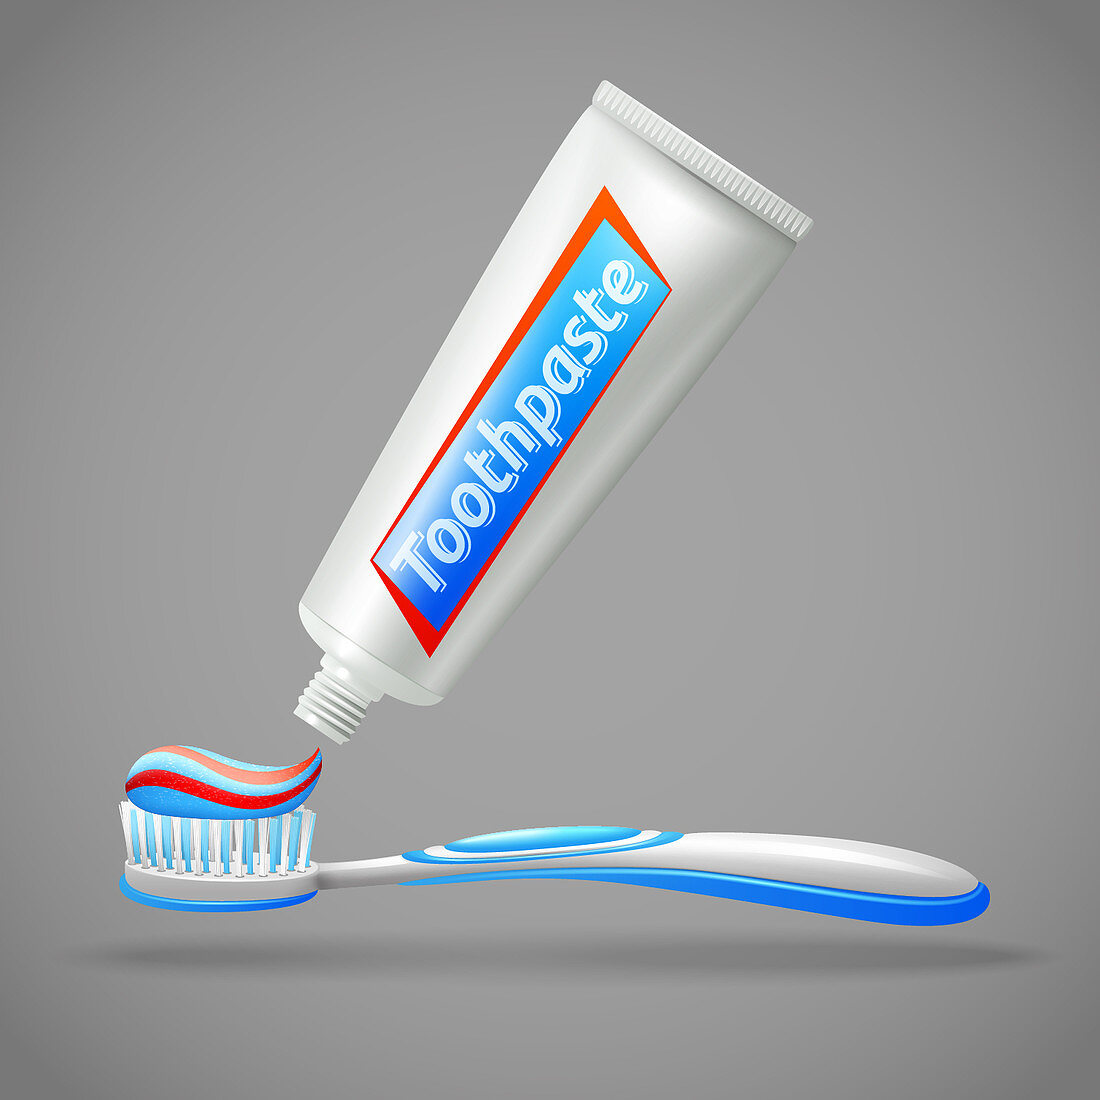 Toothbrush and toothpaste, illustration